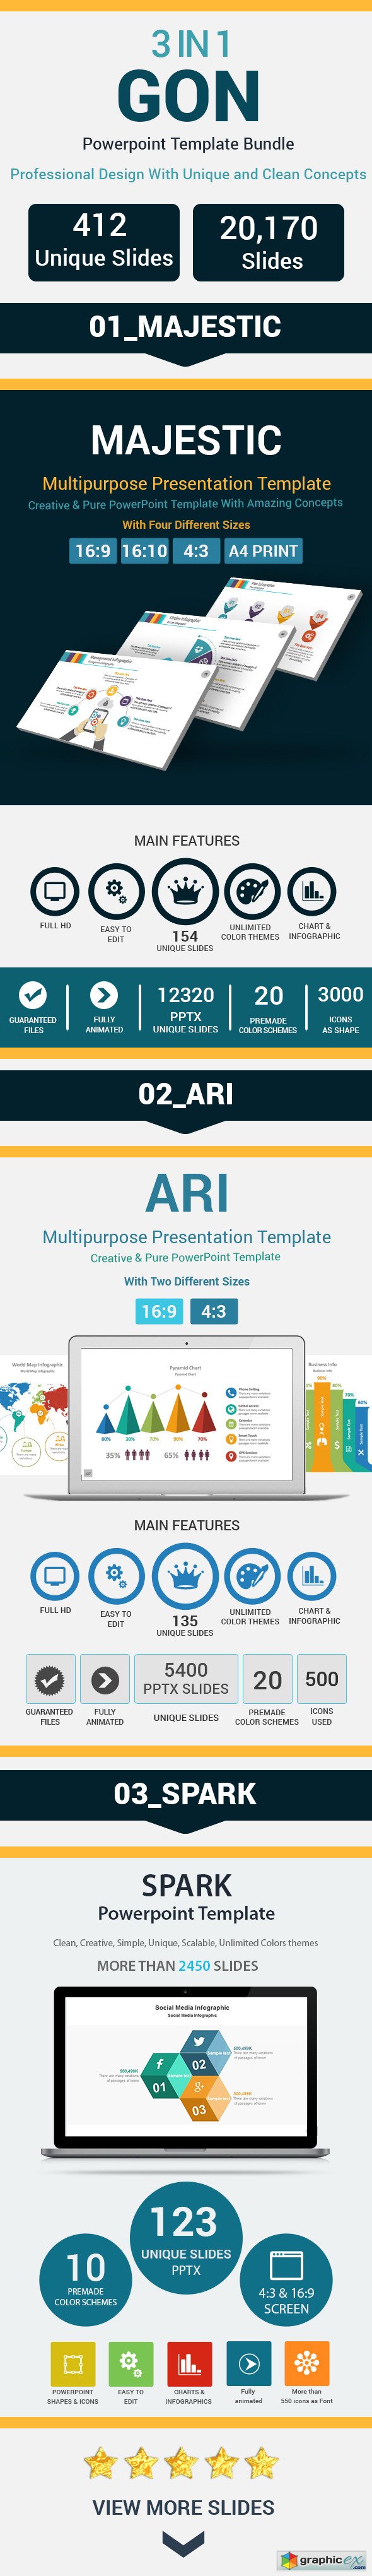 3 in 1 GON PowerPoint Template Bundle